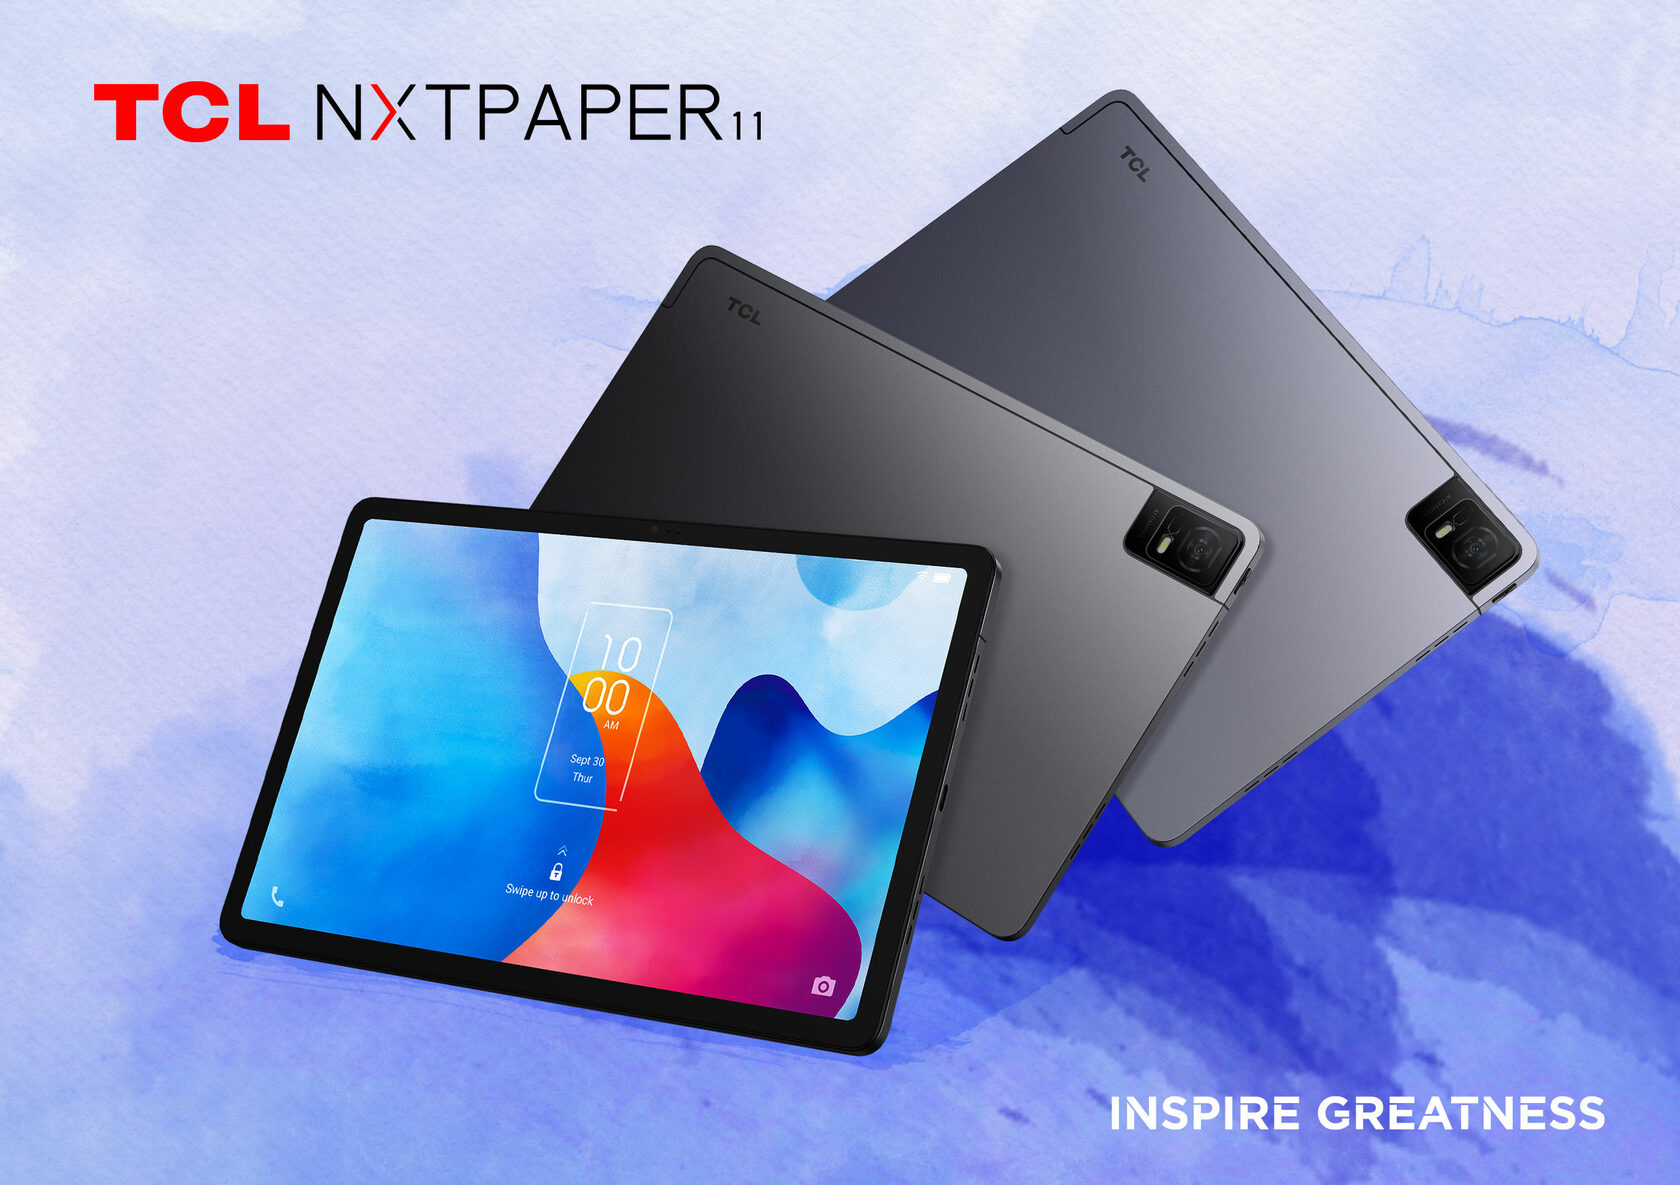 TCL NXTPAPER 11 Tablet With Paper-like Screen Experience